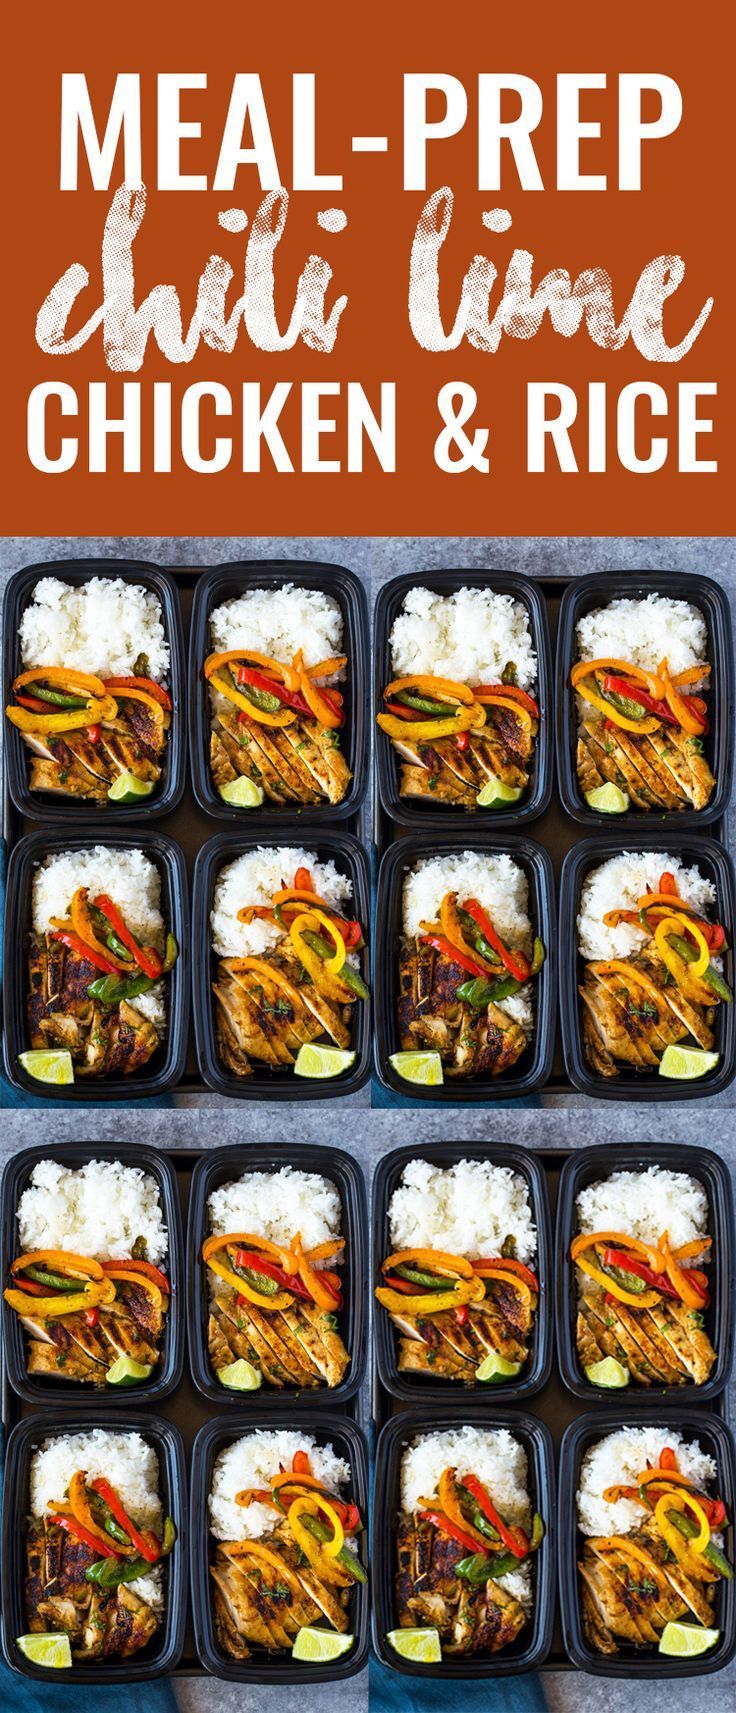 Chili Lime Chicken and Rice Meal Prep Bowls -   18 meal prep recipes healthy work lunches ideas